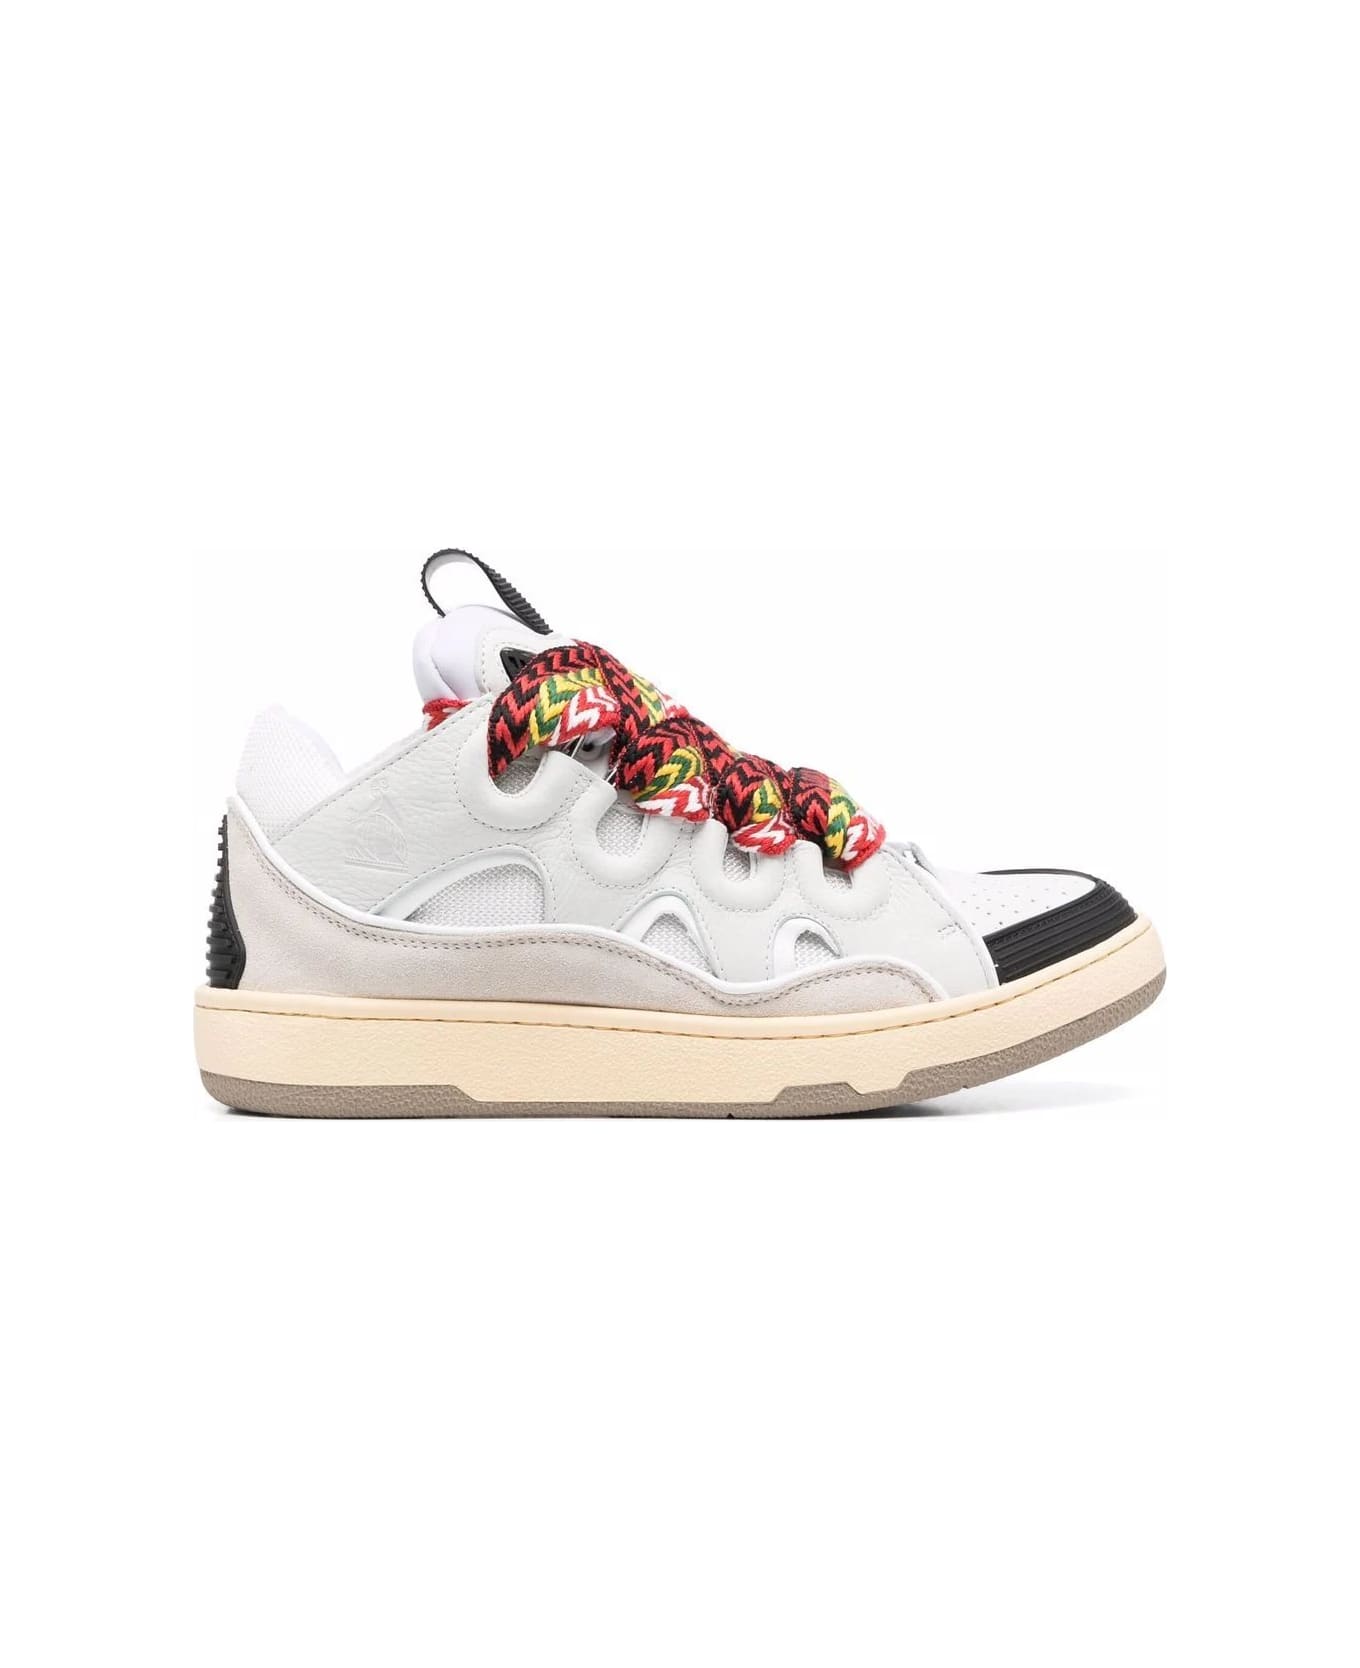 Lanvin Curb Sneakers In White Leather - White